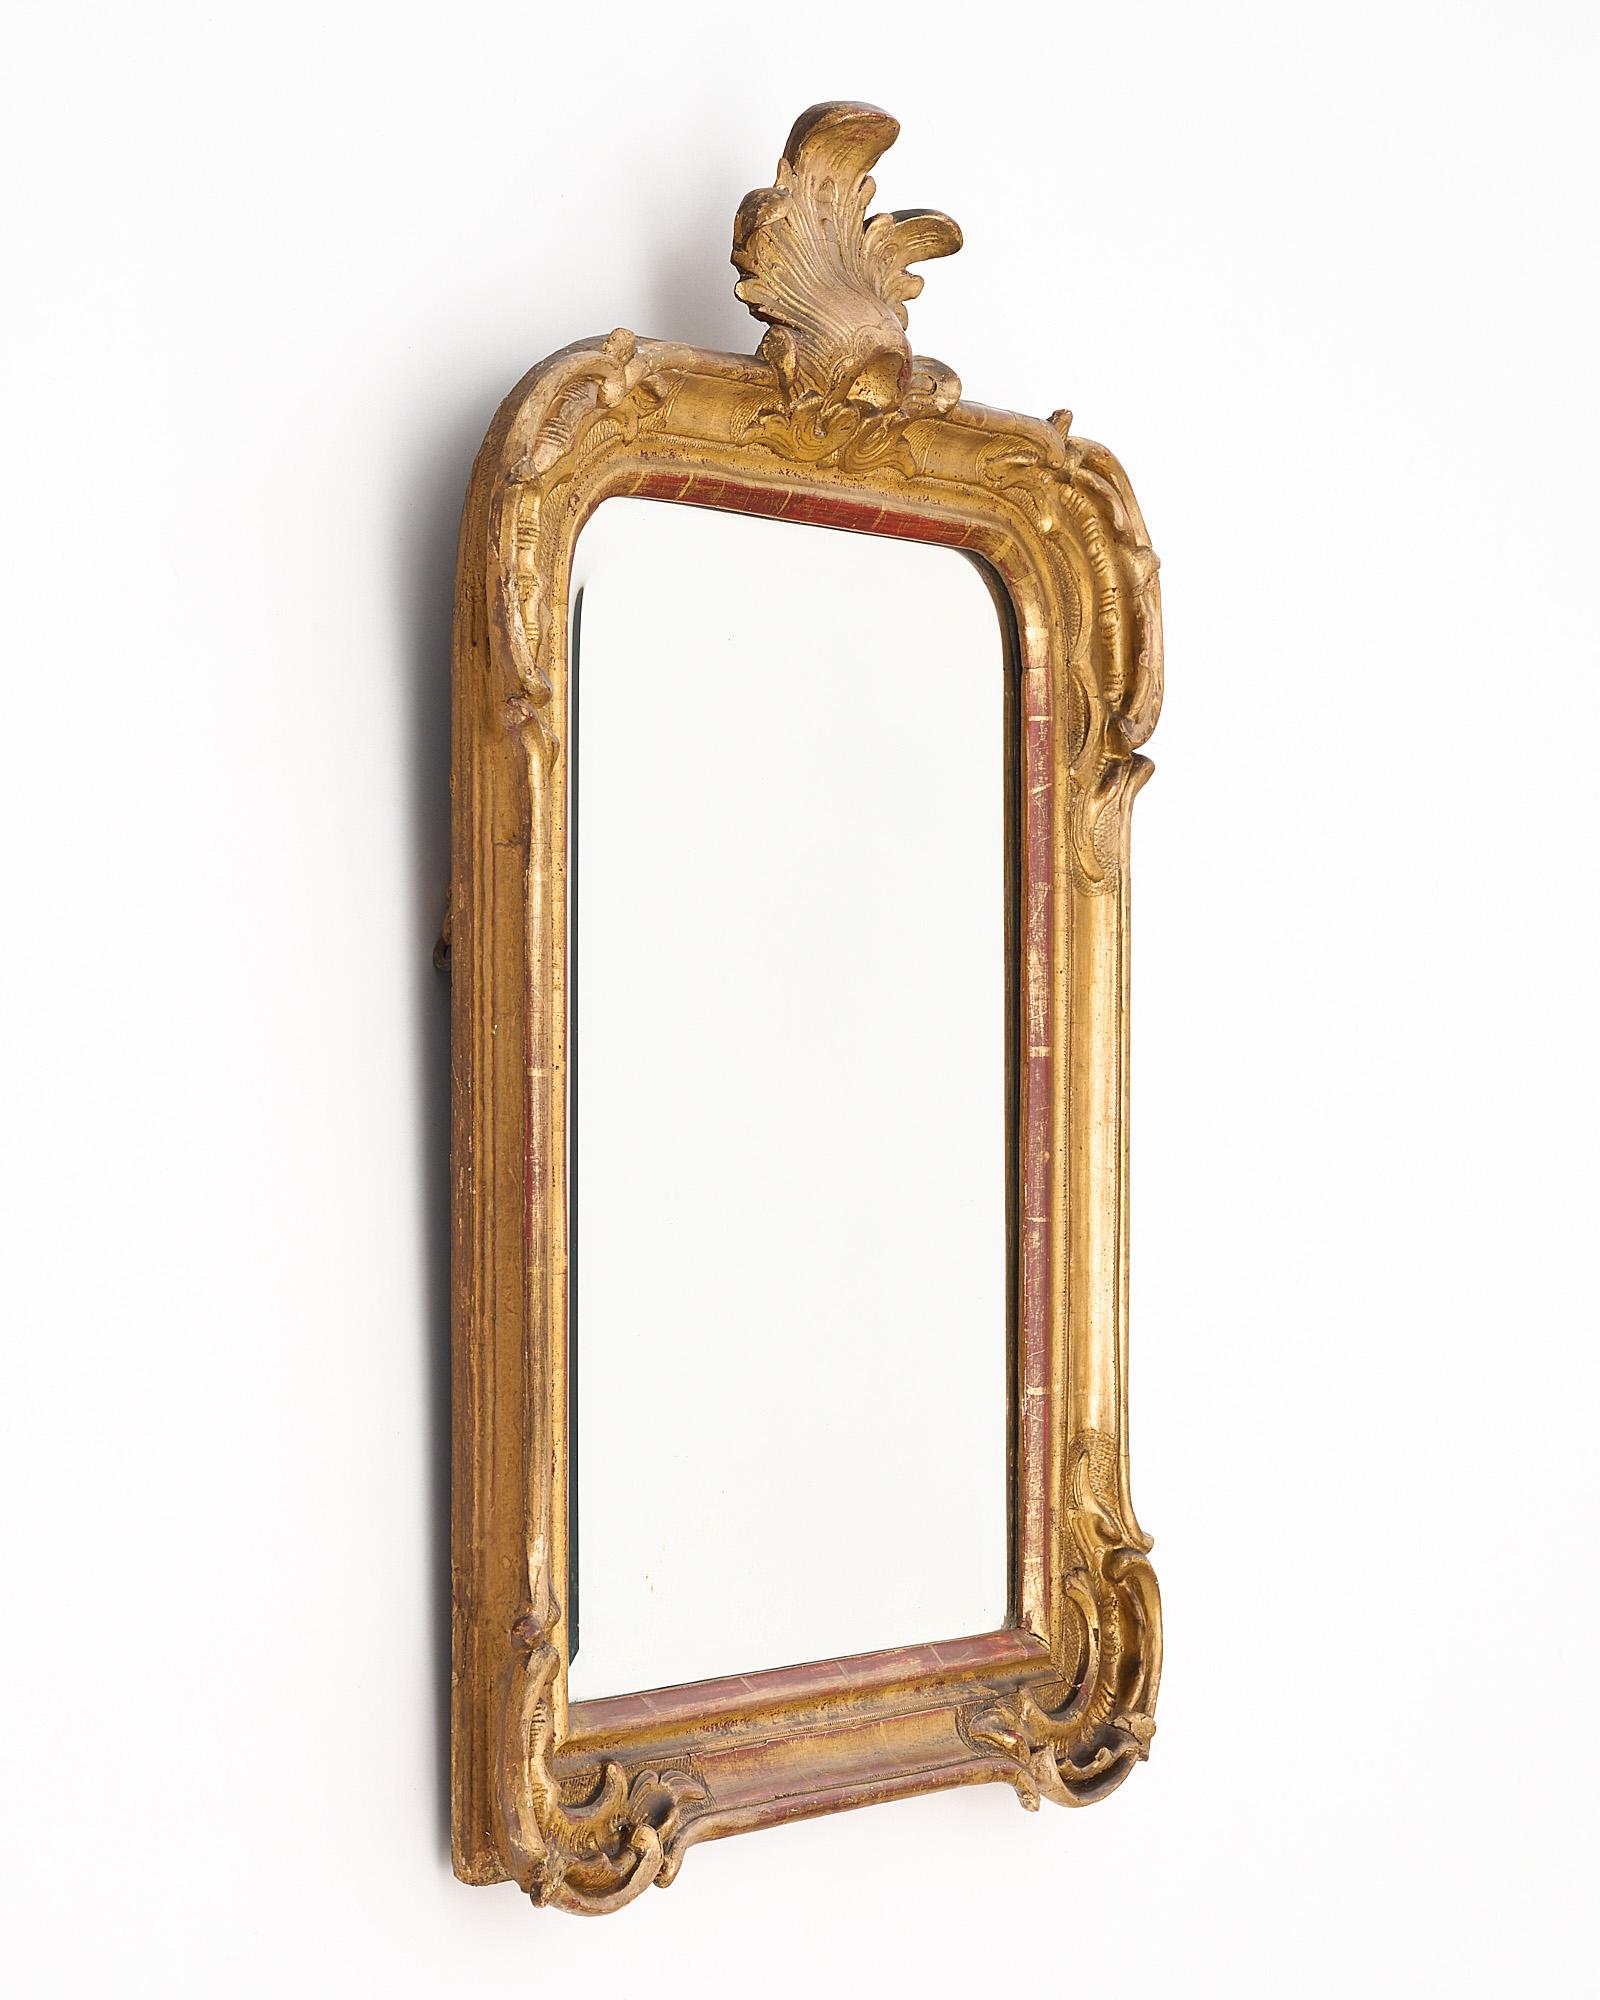 French Louis XVI mirror made of stuccoed hand-carved wood with “foliage” fronton and its original beveled mirror. The original 24 carat gold leafing lets the warm terracotta under tone shine through.
